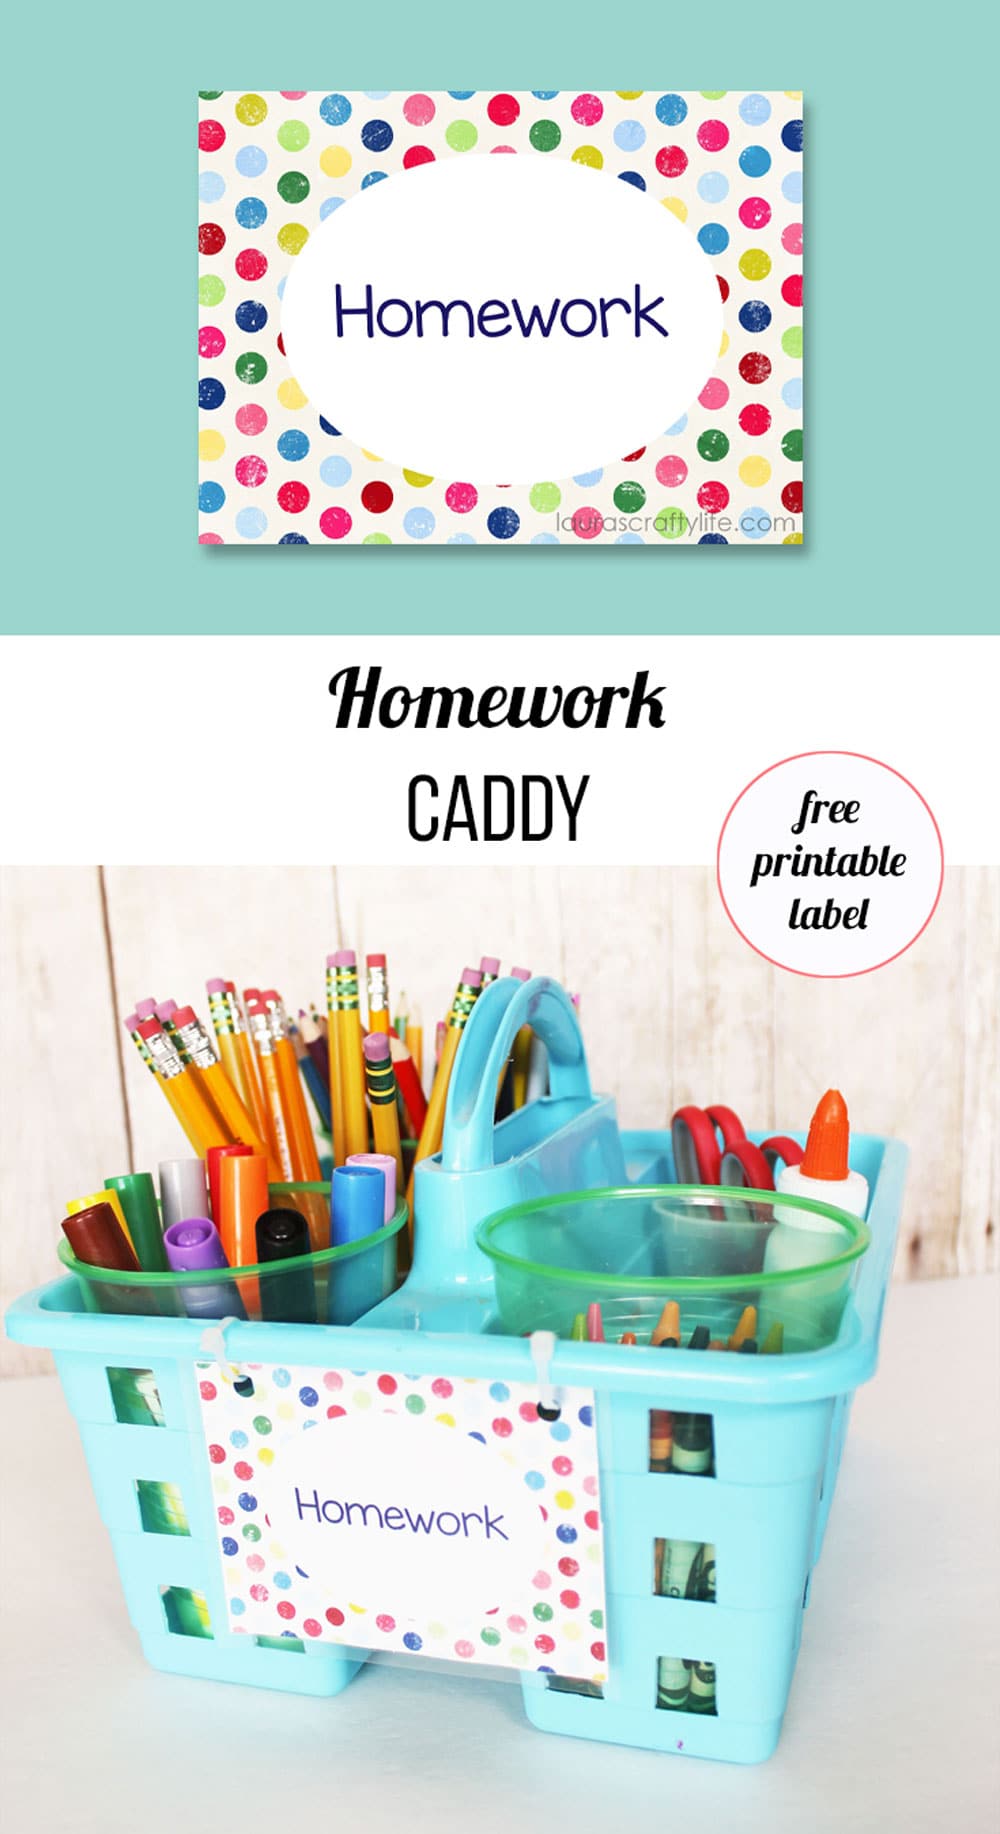 homework caddy with free printable label